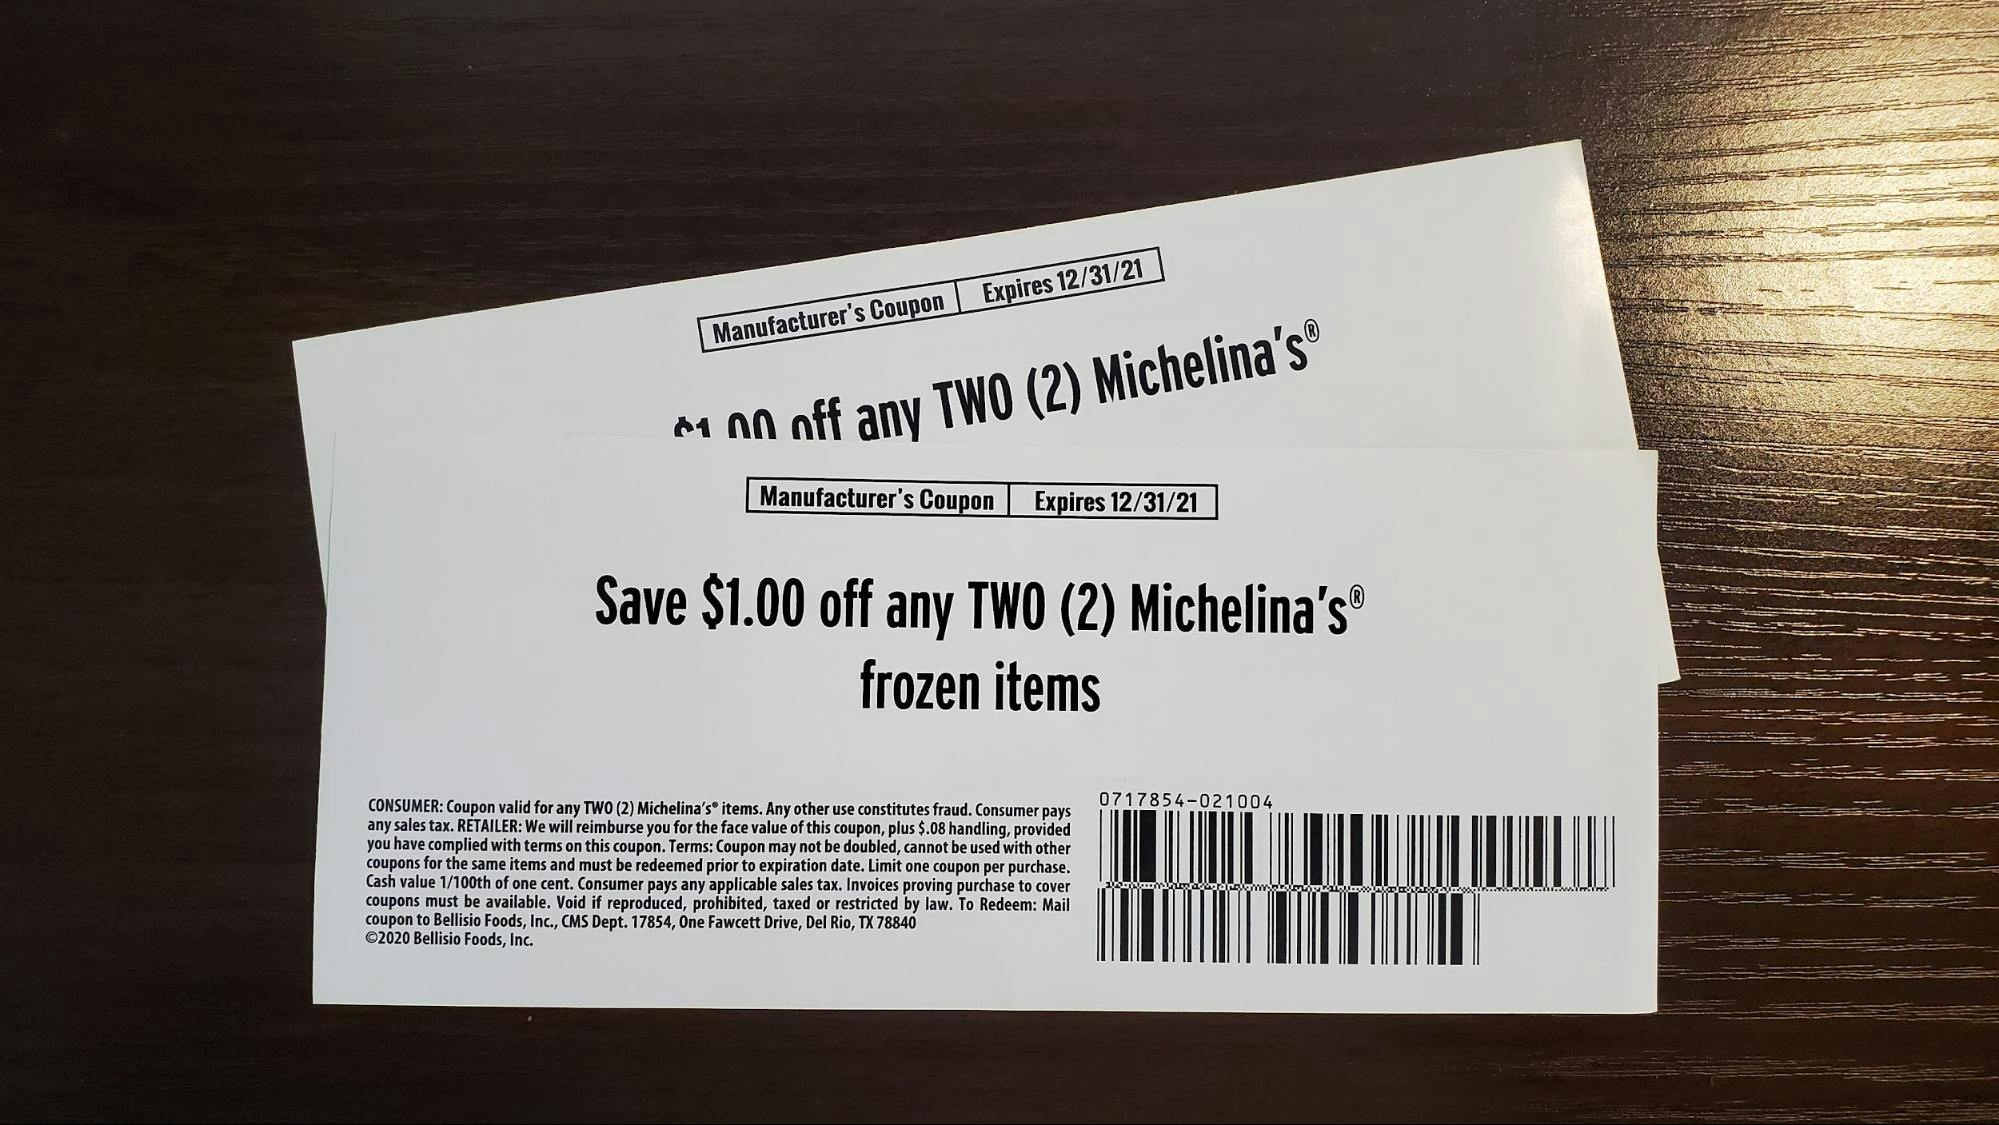 Free Michelina's coupons by mail